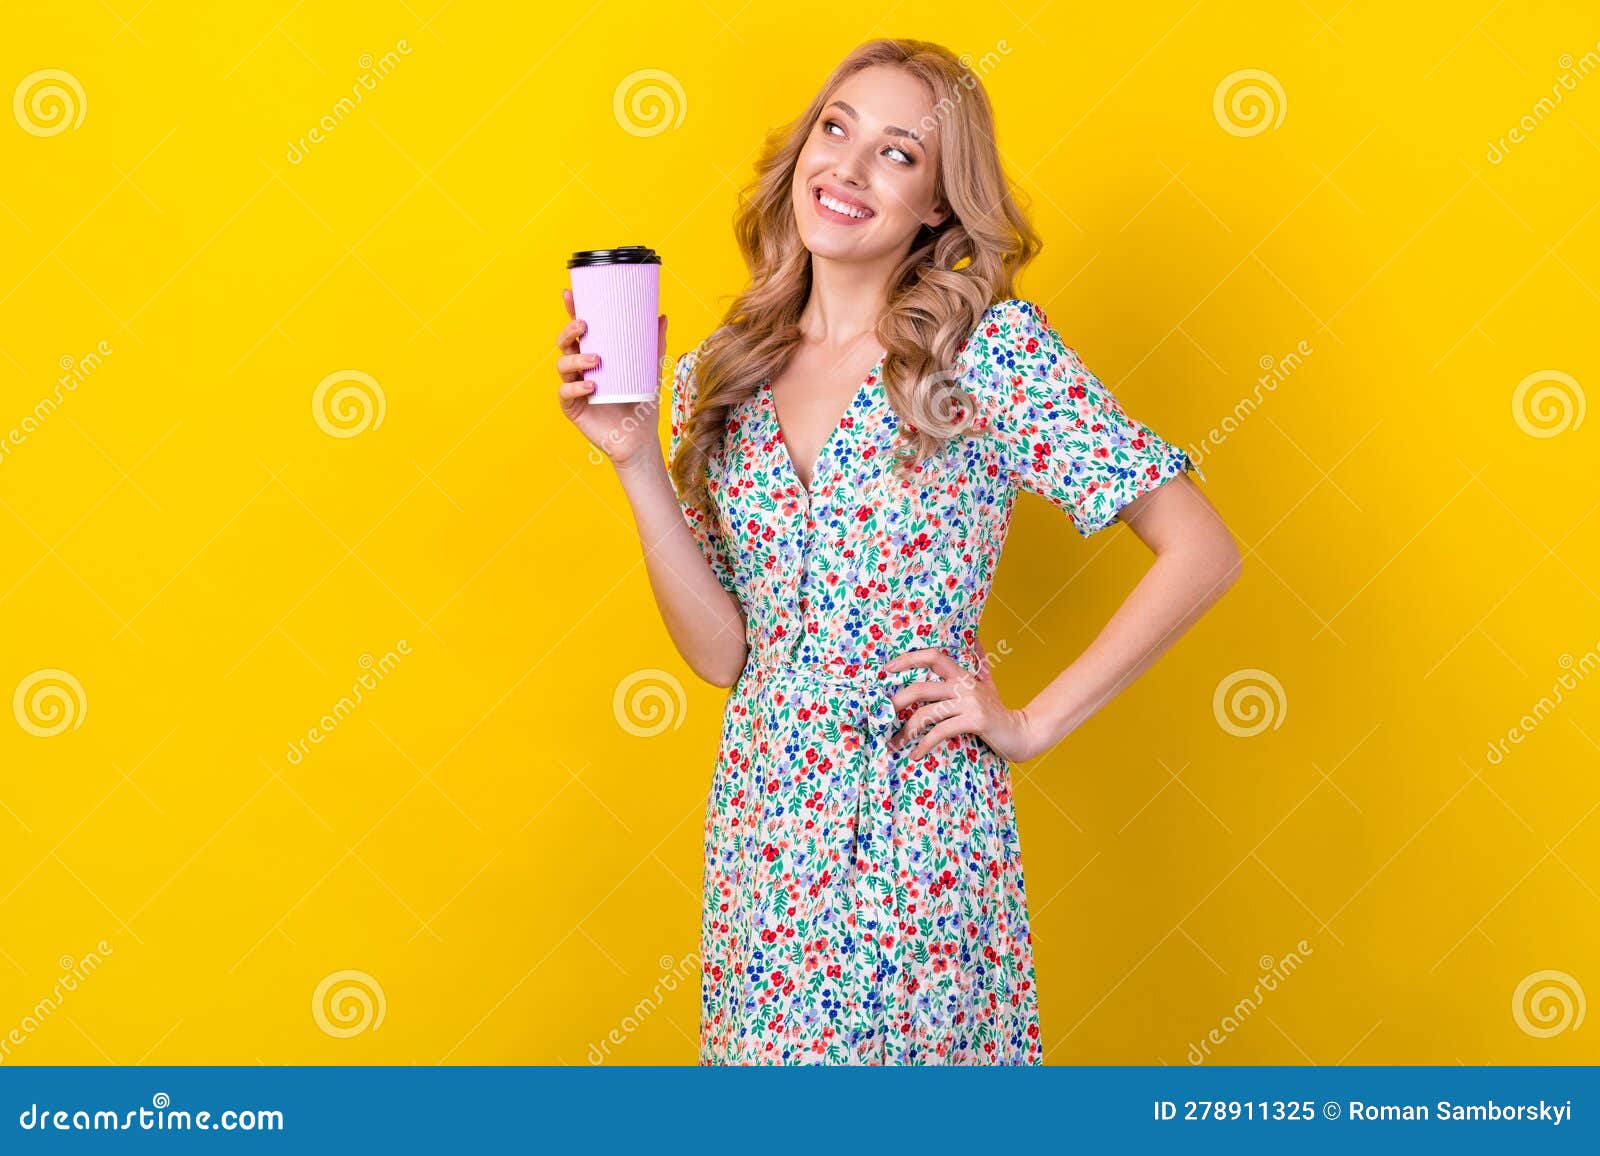 8. Wavy Blonde Hair Man Stock Photos, Pictures & Royalty-Free Images - iStock - wide 9